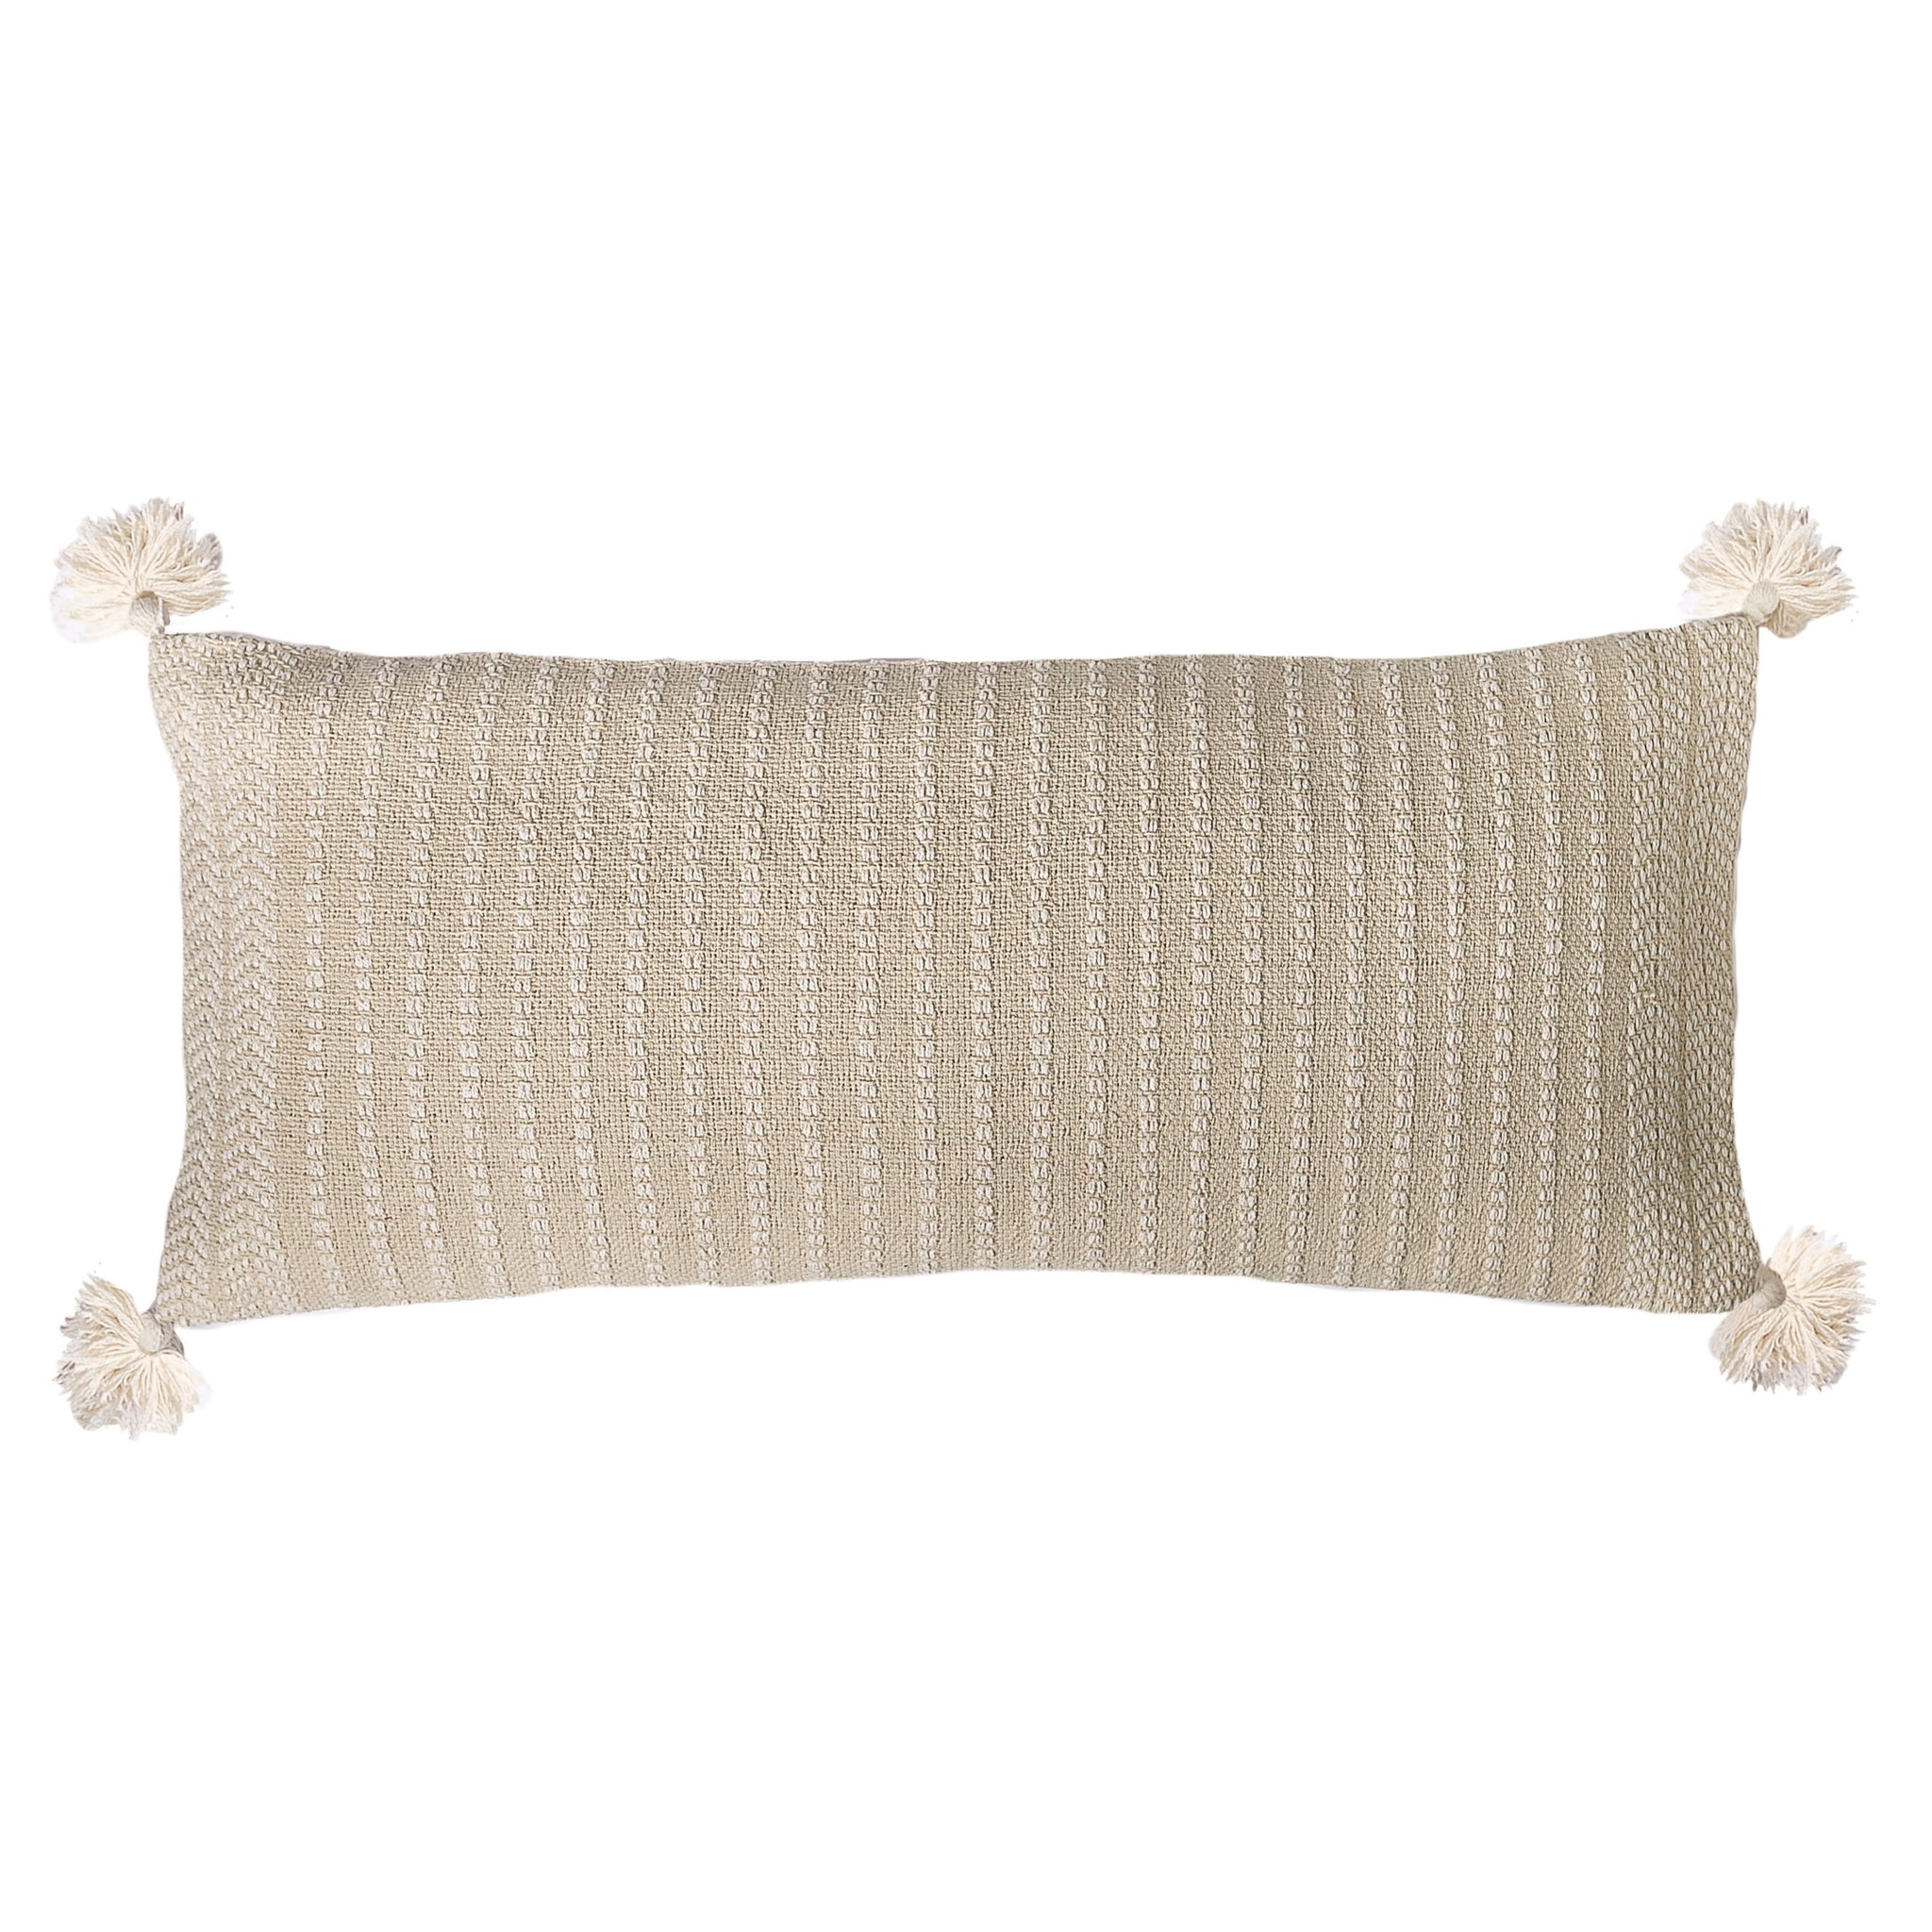 Beautiful soft oyster colored long rectangular throw pillow with cream stitching, in chevron and striped patterns, accented at each corner with cream cotton tassels.